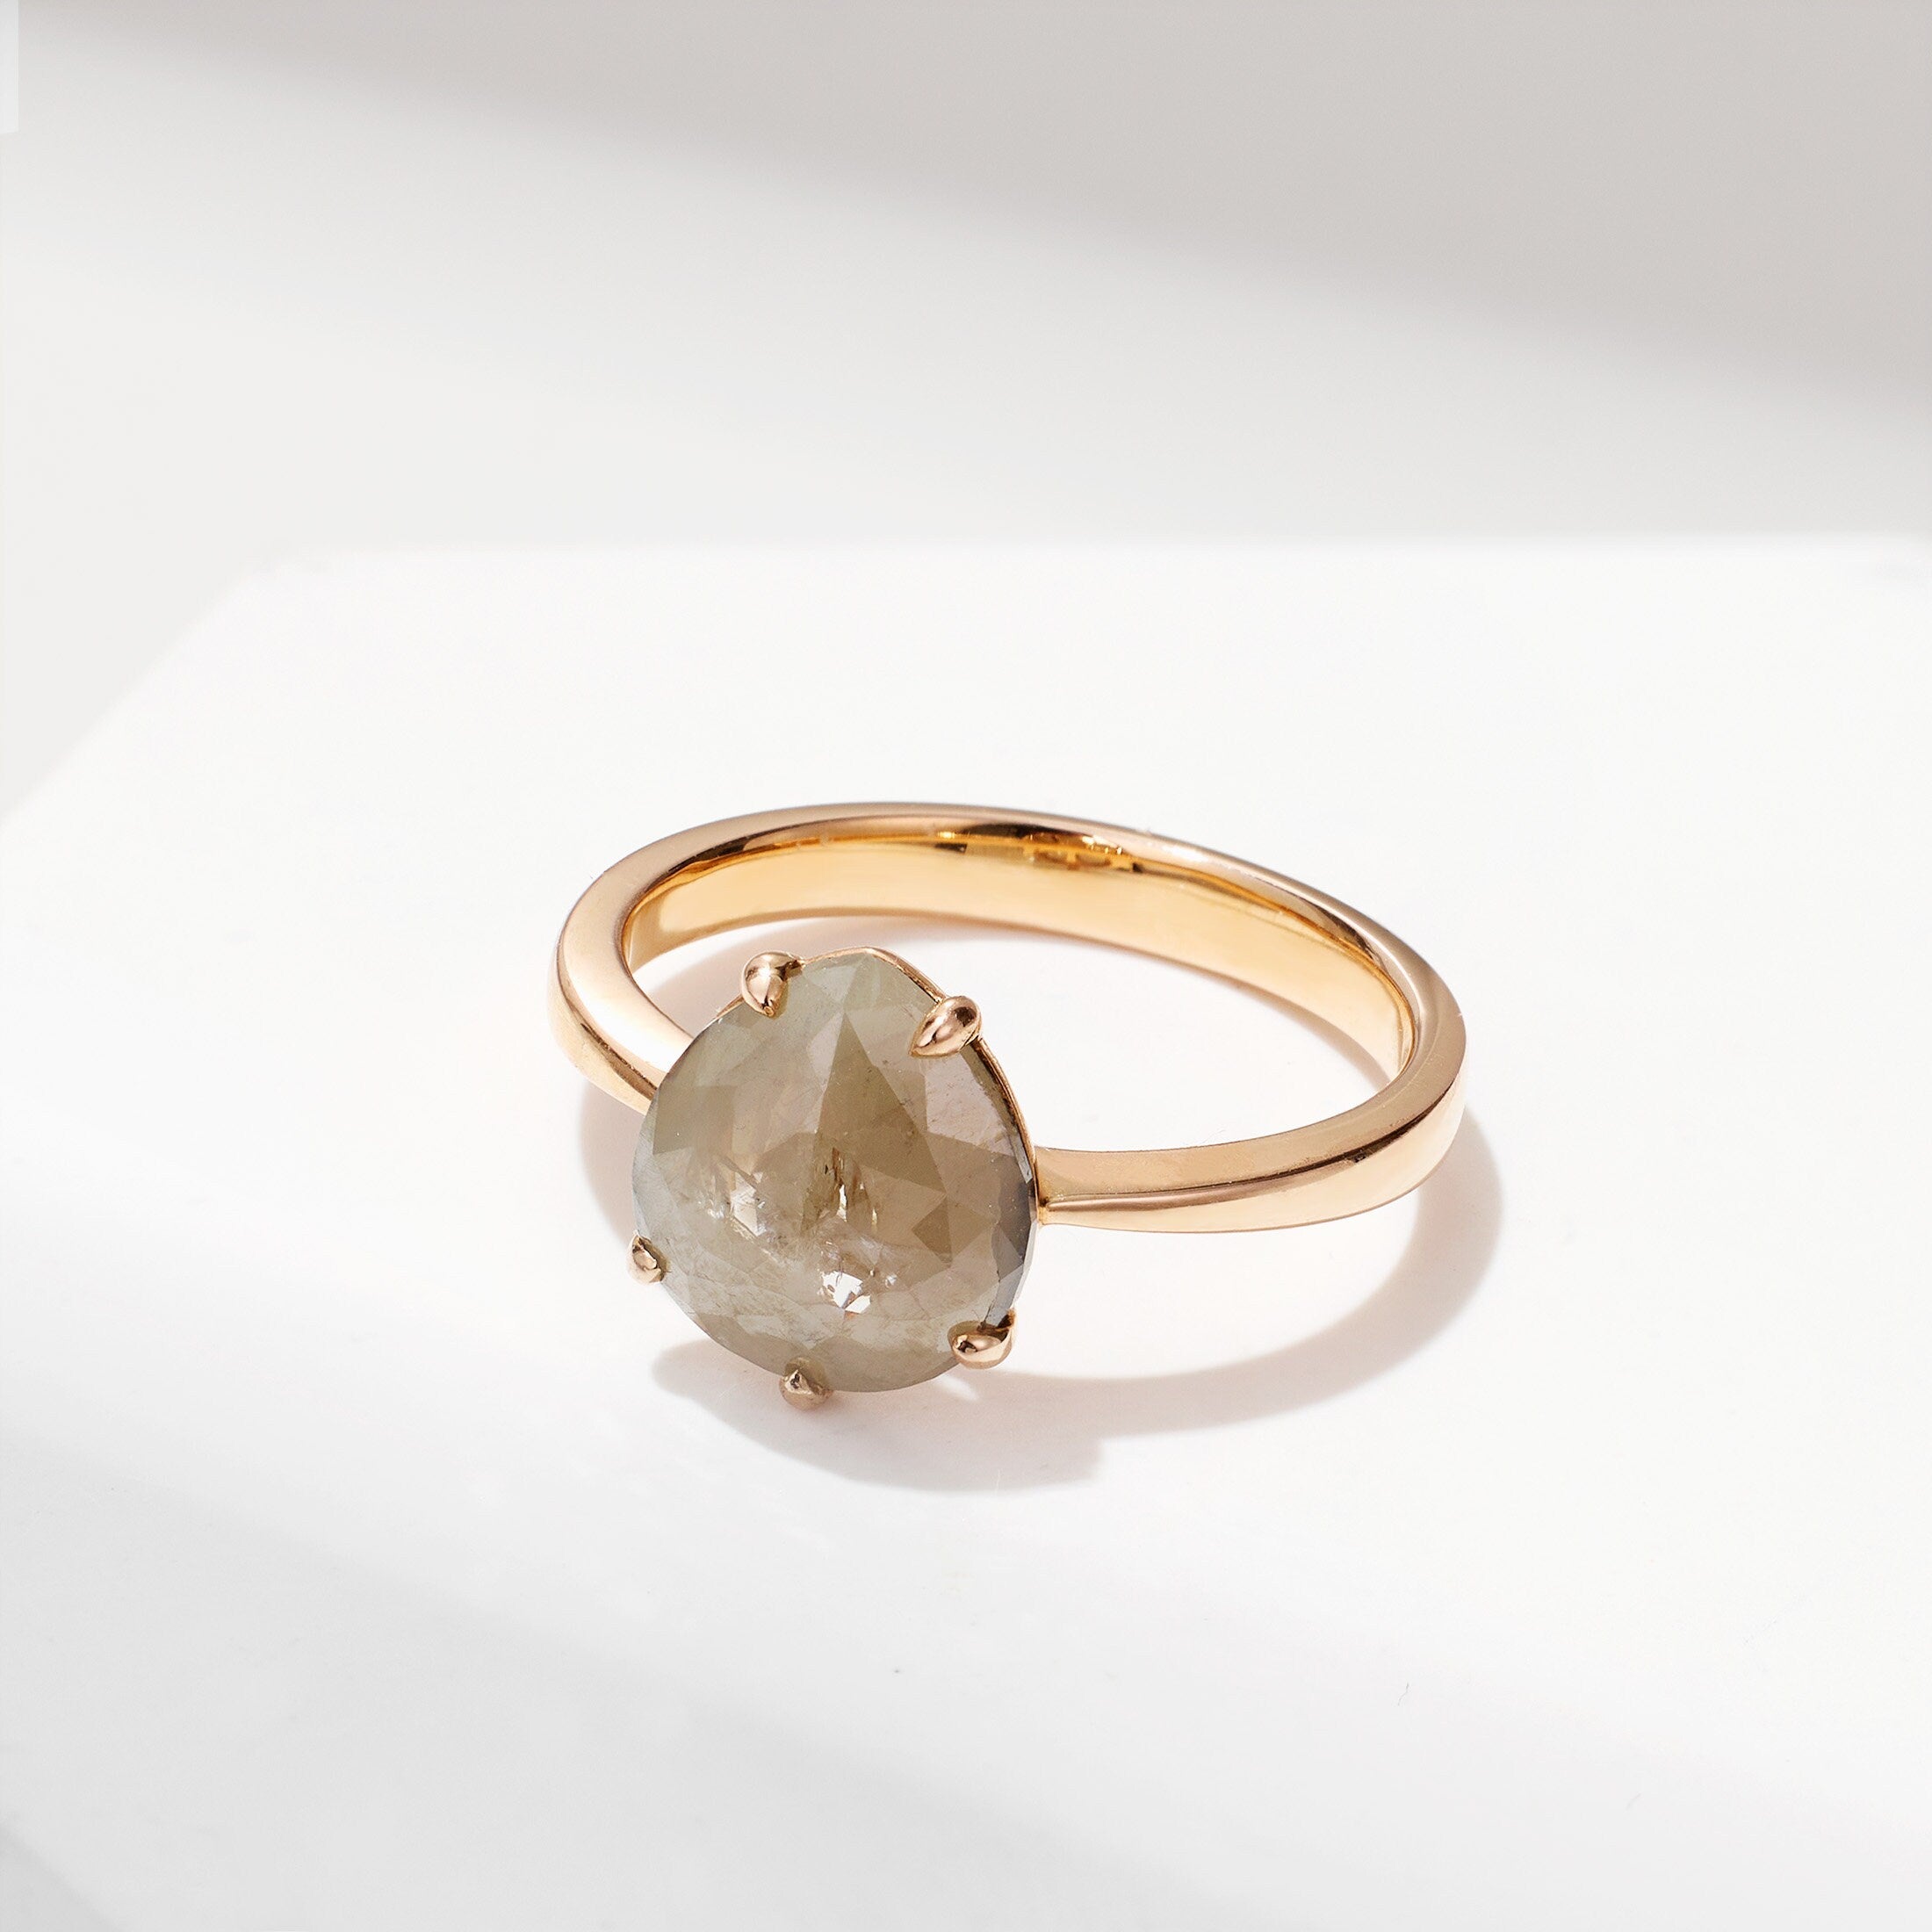 Raw Diamond Solitare Ring in 18K Rose Gold, Boho Style, Gift for her, Engagement Ring, Minimalist